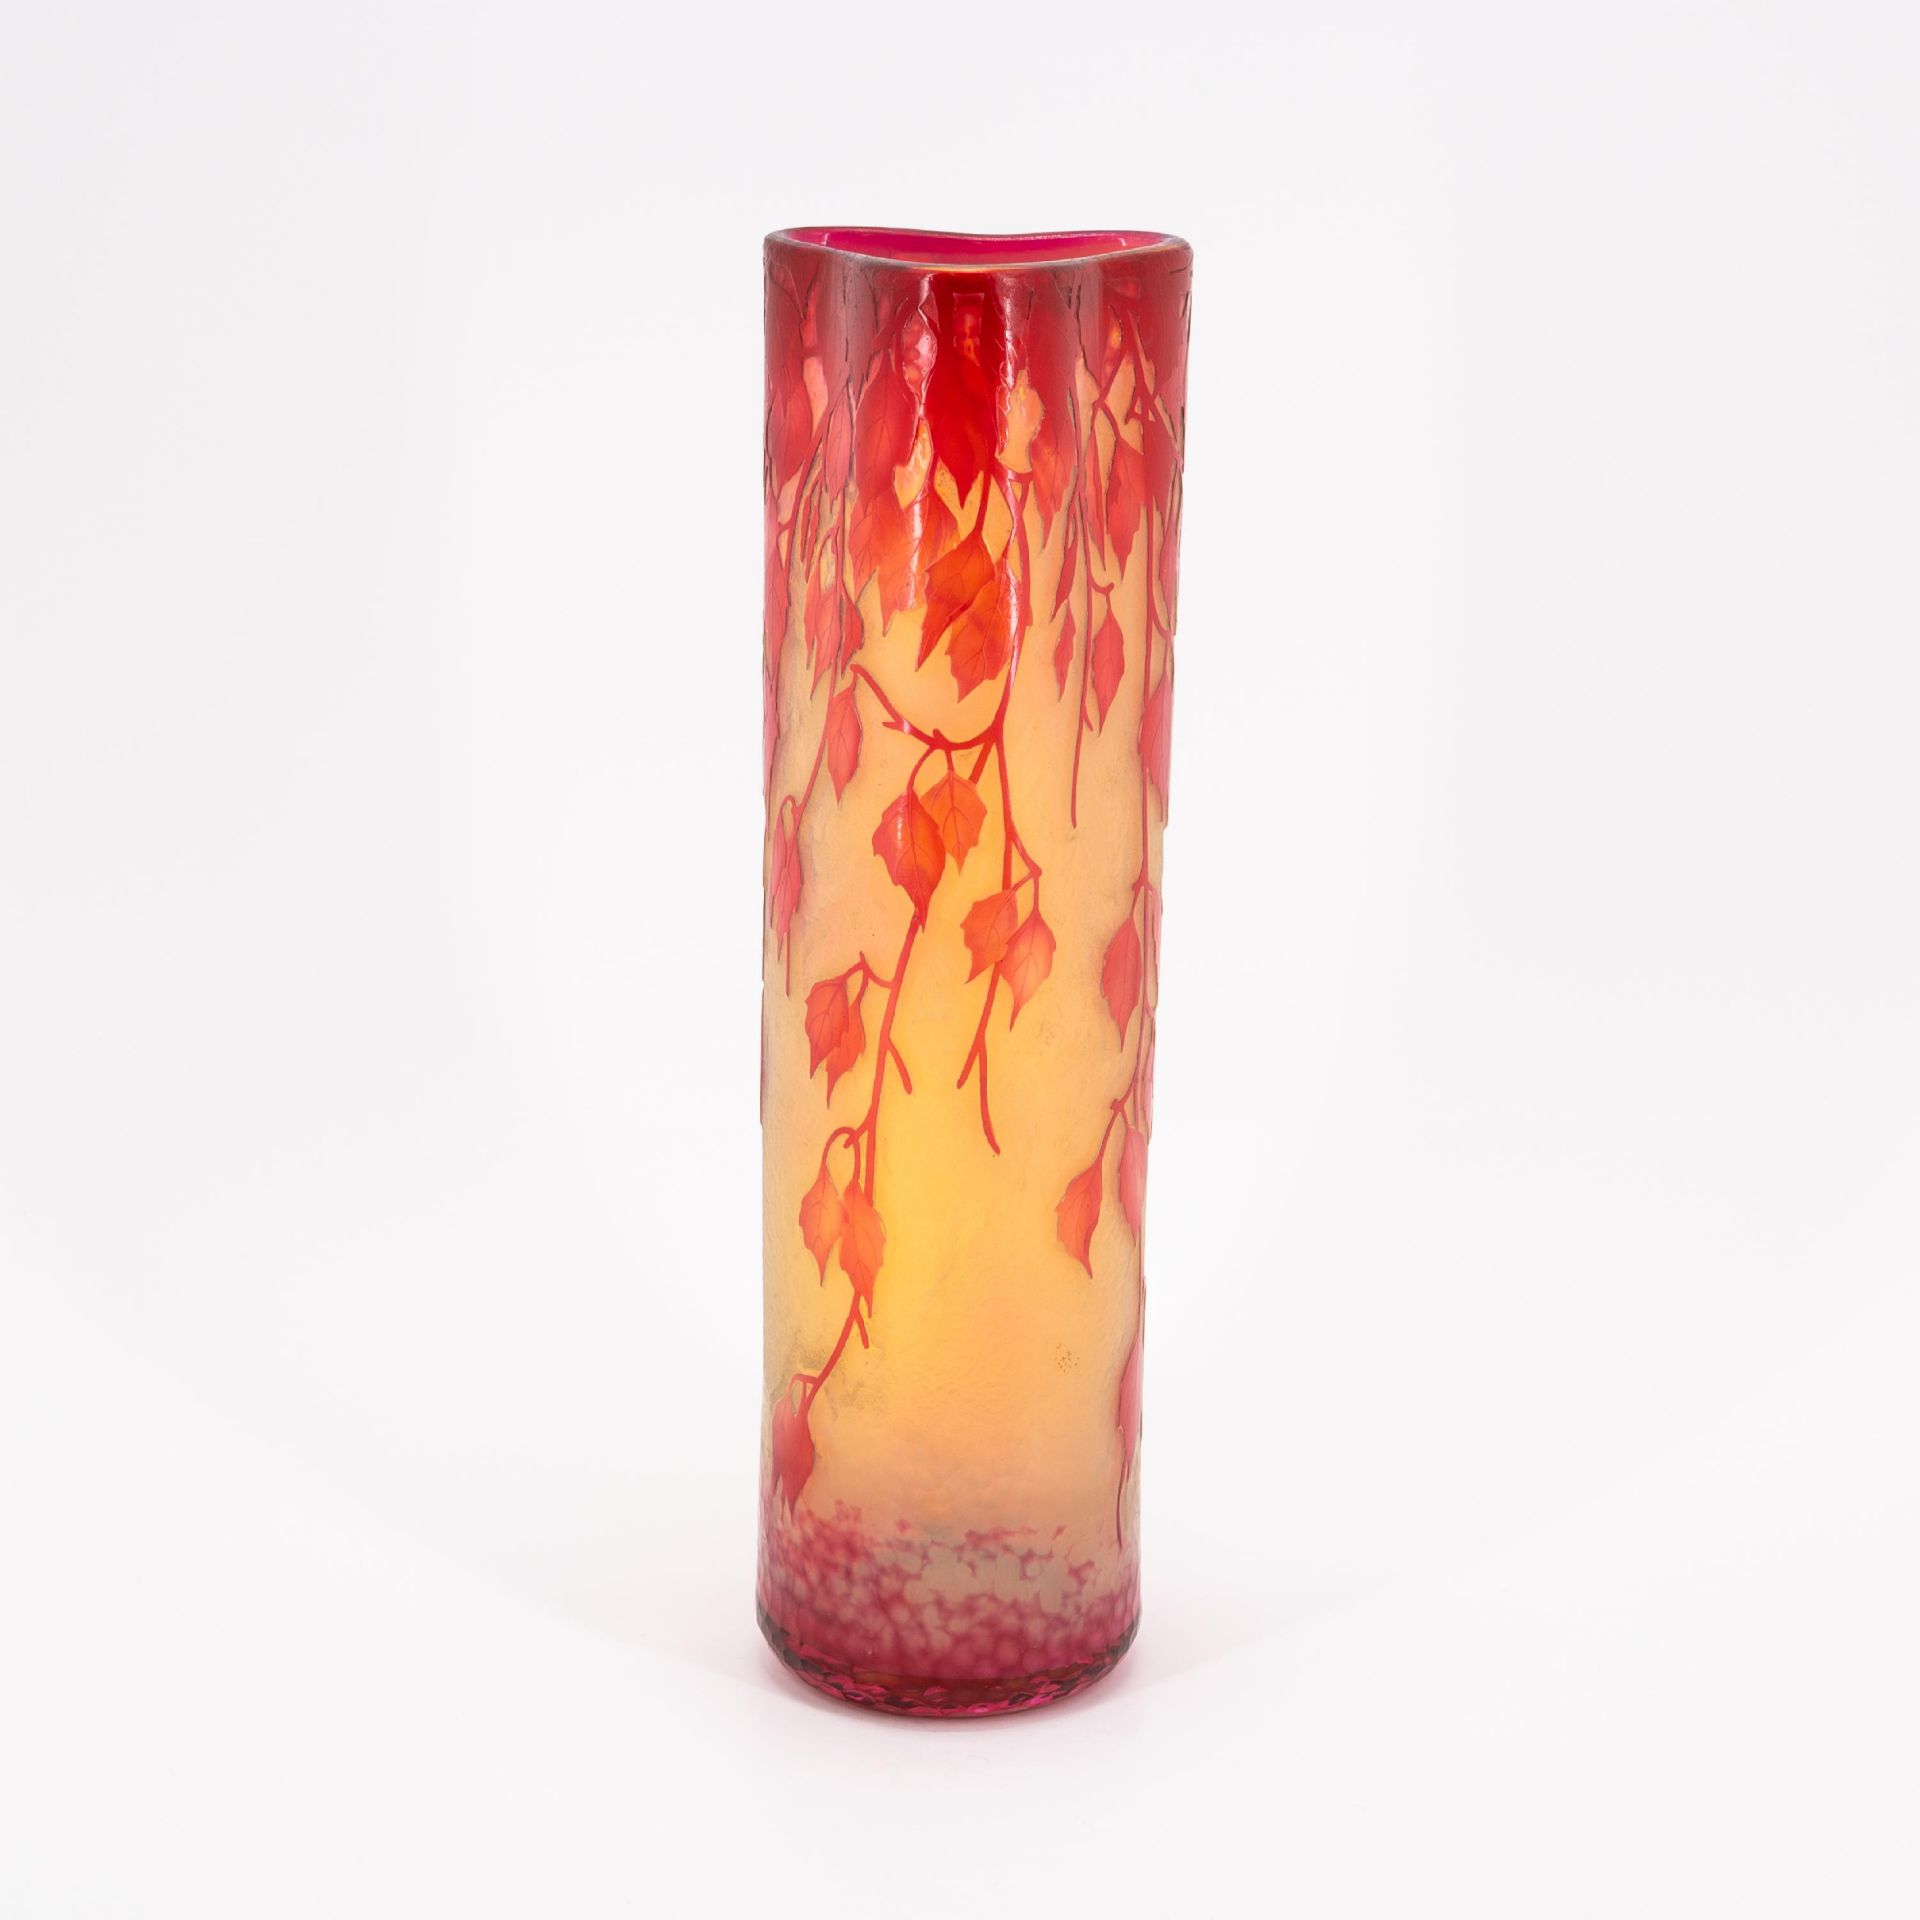 CYLINDER-SHAPED GLASS VASE WITH BIRCH LEAVES - Image 4 of 6